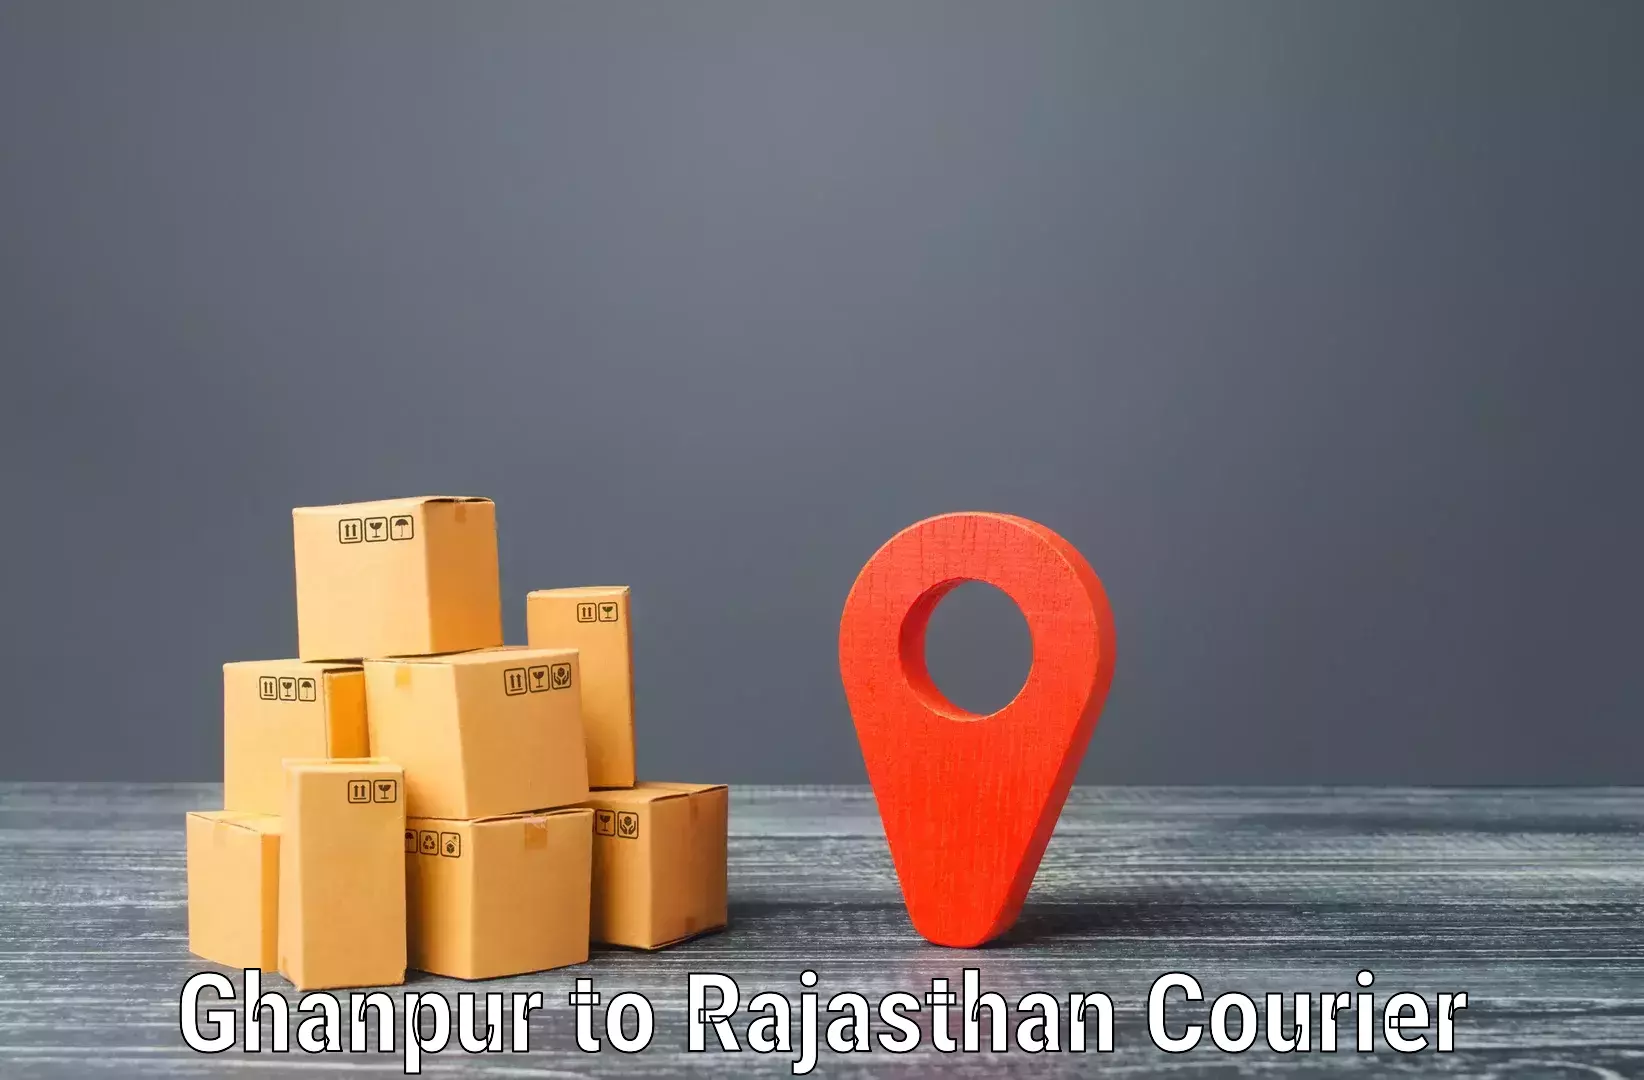 Express logistics service Ghanpur to Sikar